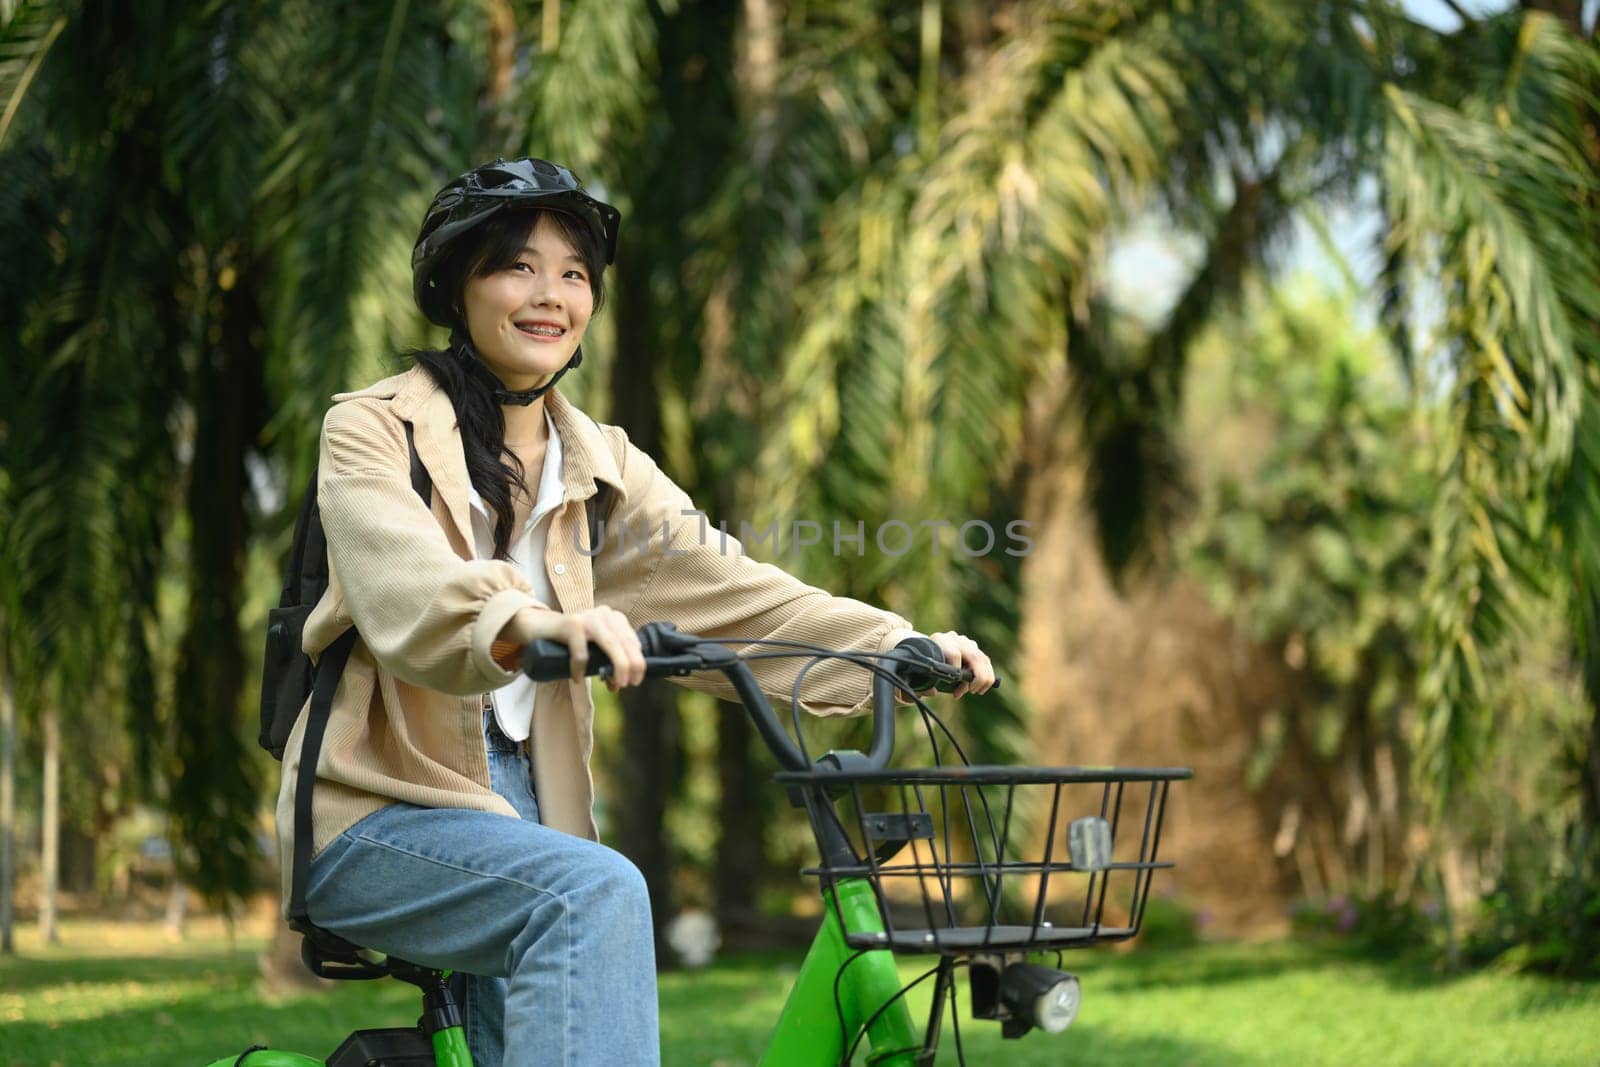 Smiling young woman in safety helmet riding a bicycle through city spring park by prathanchorruangsak